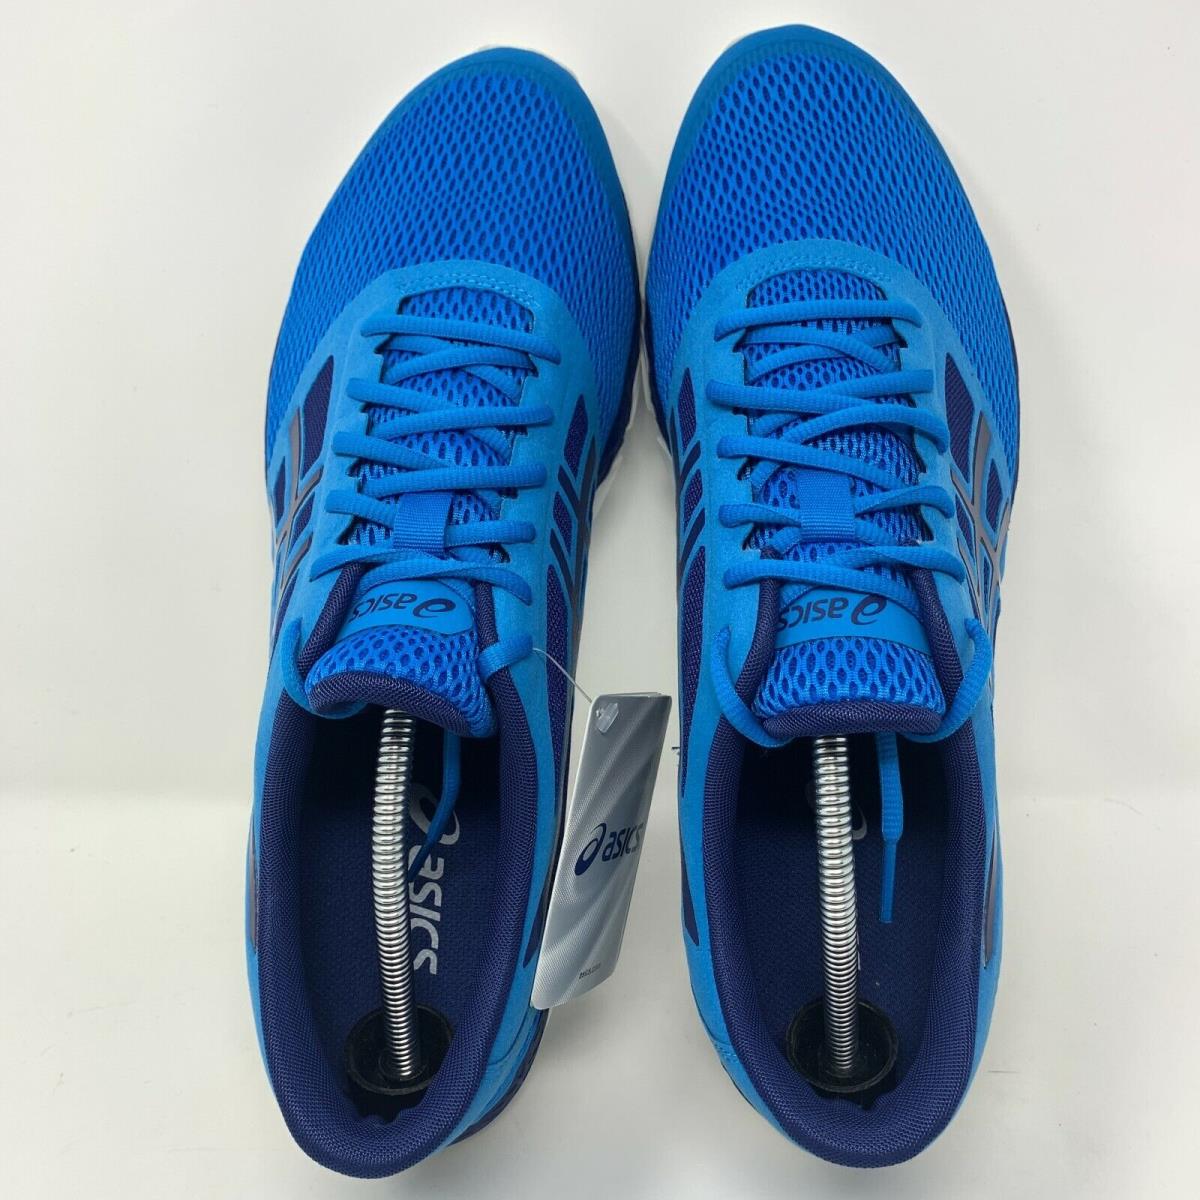 Asics 33 Running Shoes Mens Size 12.5 Blue Athletic Training Sneakers | 074663720803 - ASICS shoes - Blue | SporTipTop